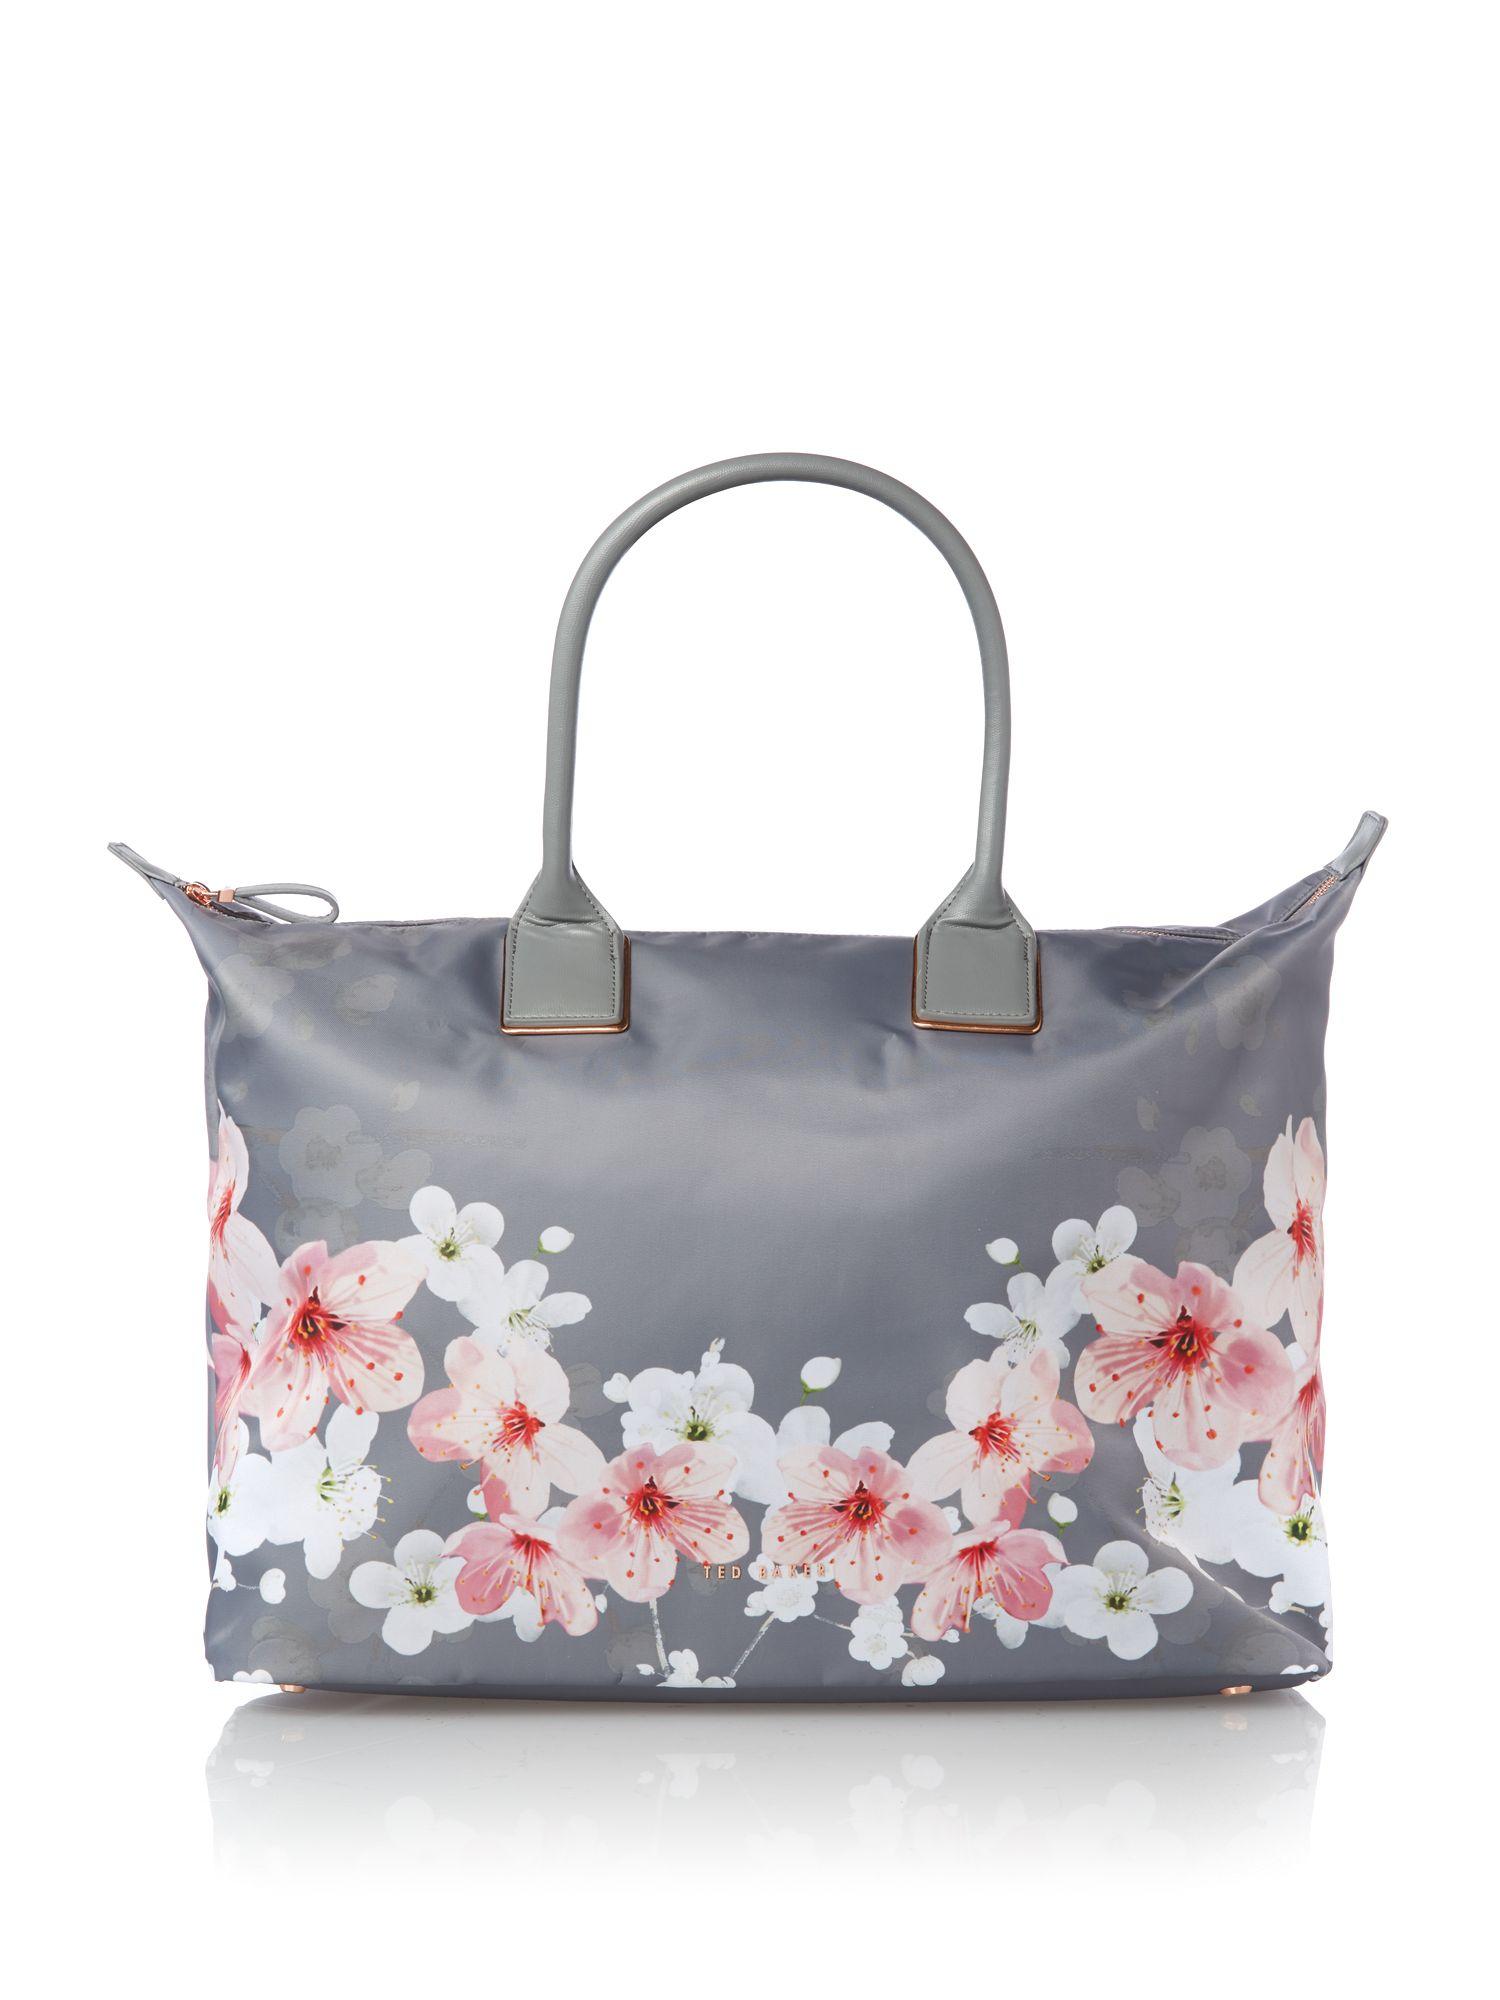 Ted Baker Synthetic Large Blossom Print Tote Bag in Grey (Grey) - Lyst